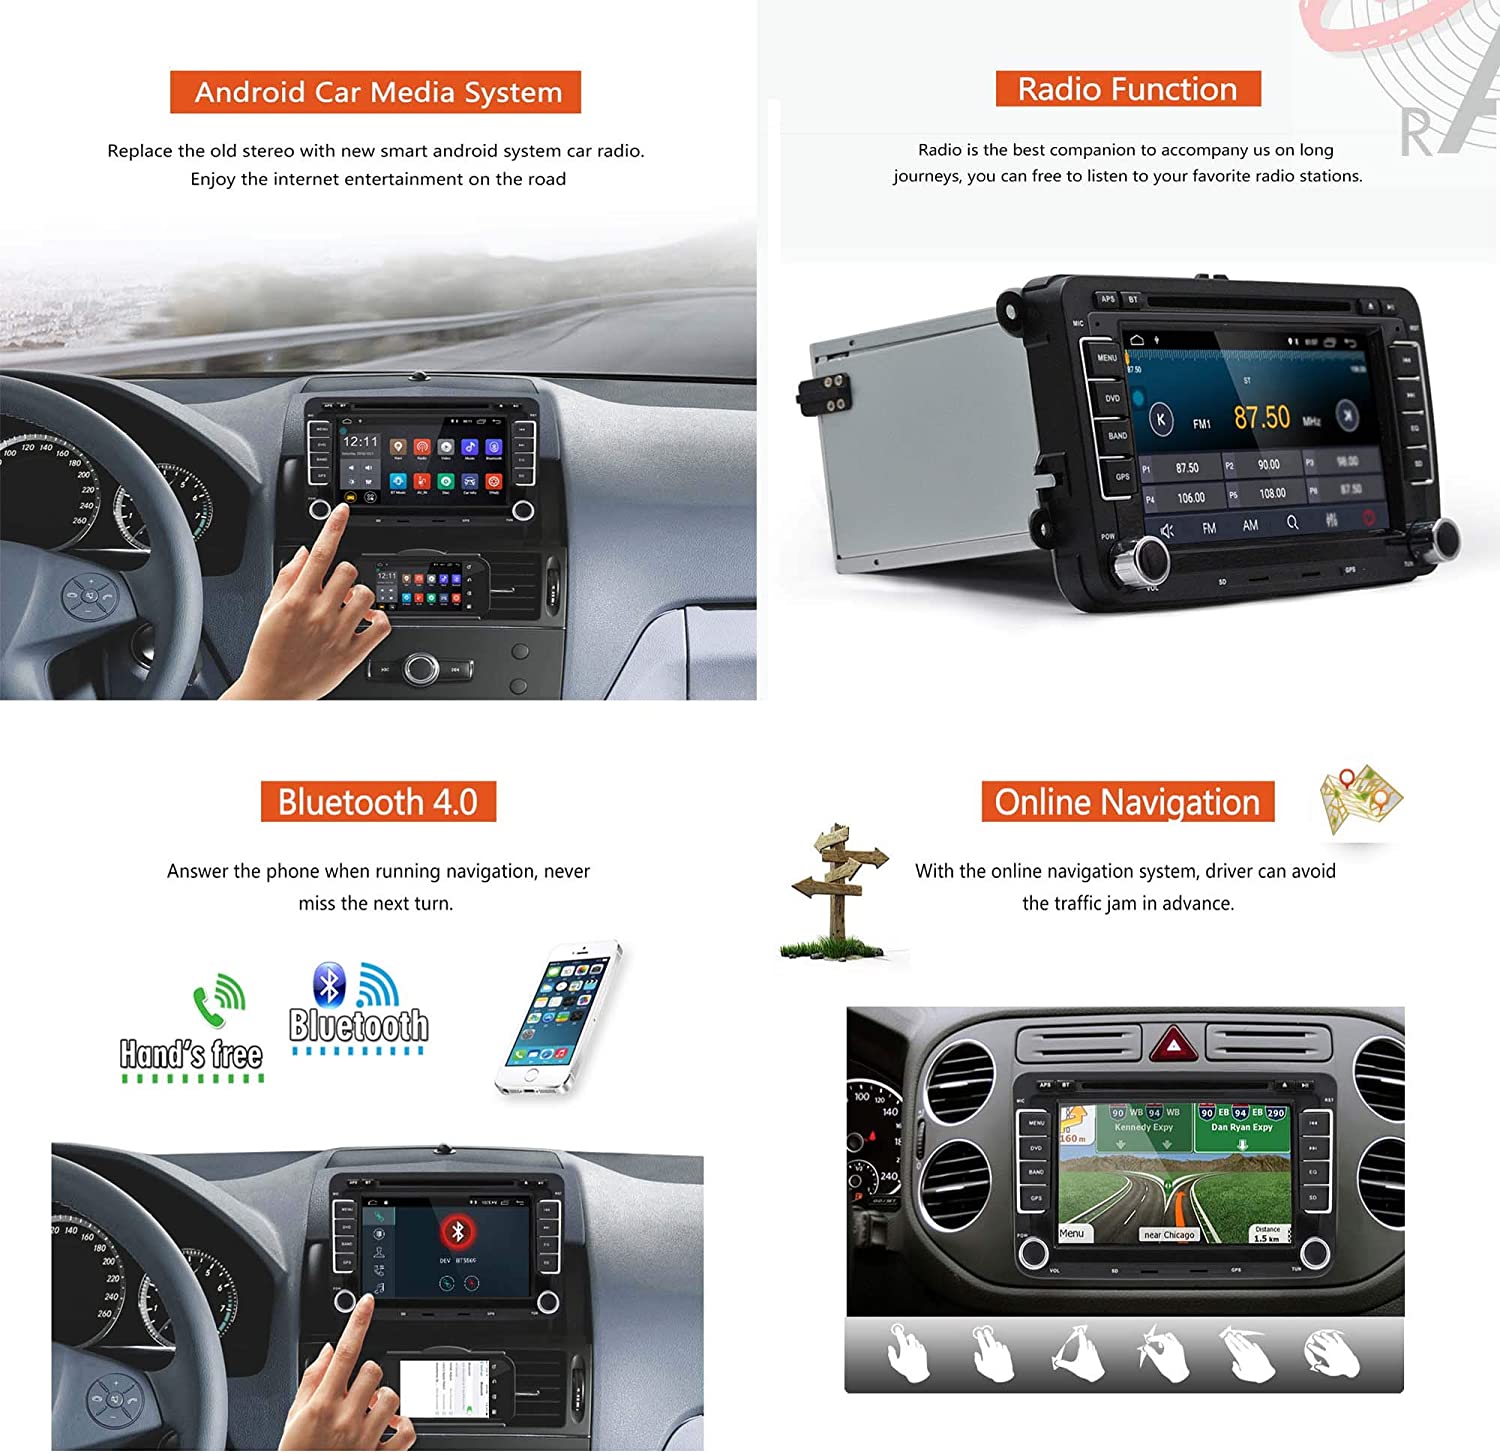  Universal Car GPS Navigation System for Volkswagen VW PASSAT  JETTA BEETL CC GOLF TIGUAN EOS Double Din Car Stereo DVD Player 7 Inch  Touch Screen TFT LCD Monitor In-dash DVD Video